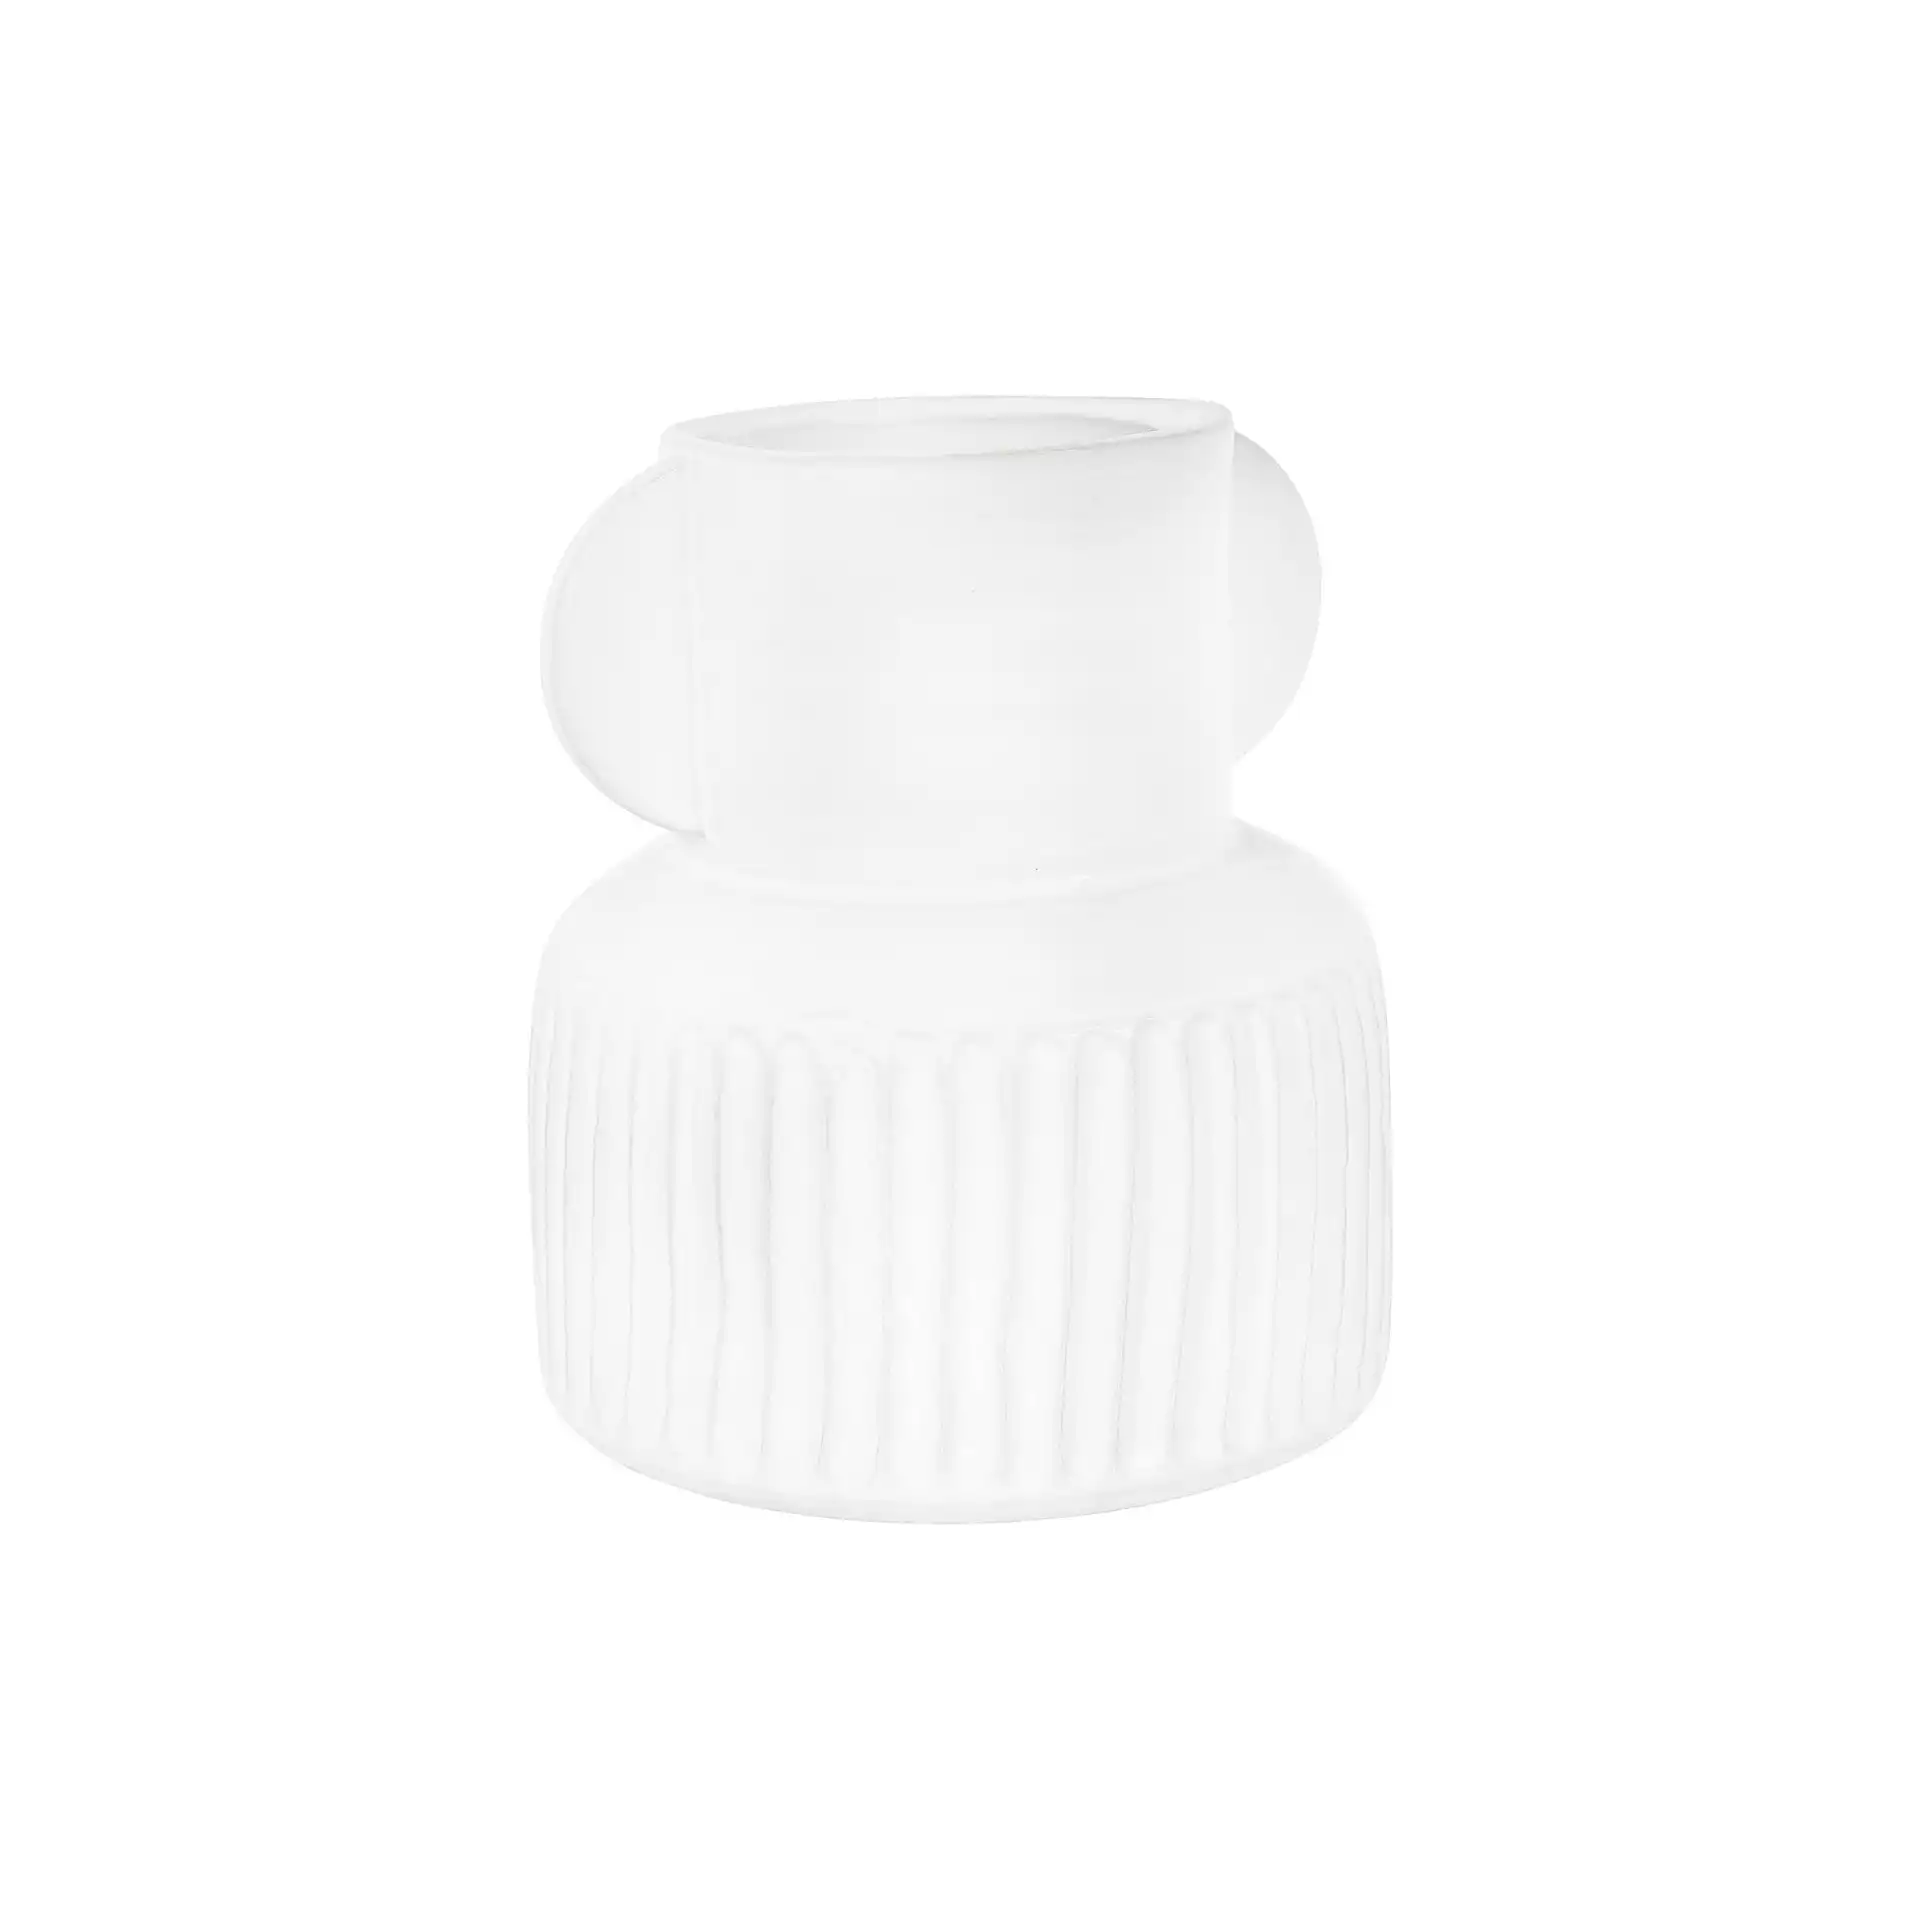 Pleated Stoneware Vase with Vertical Handles, White, Large